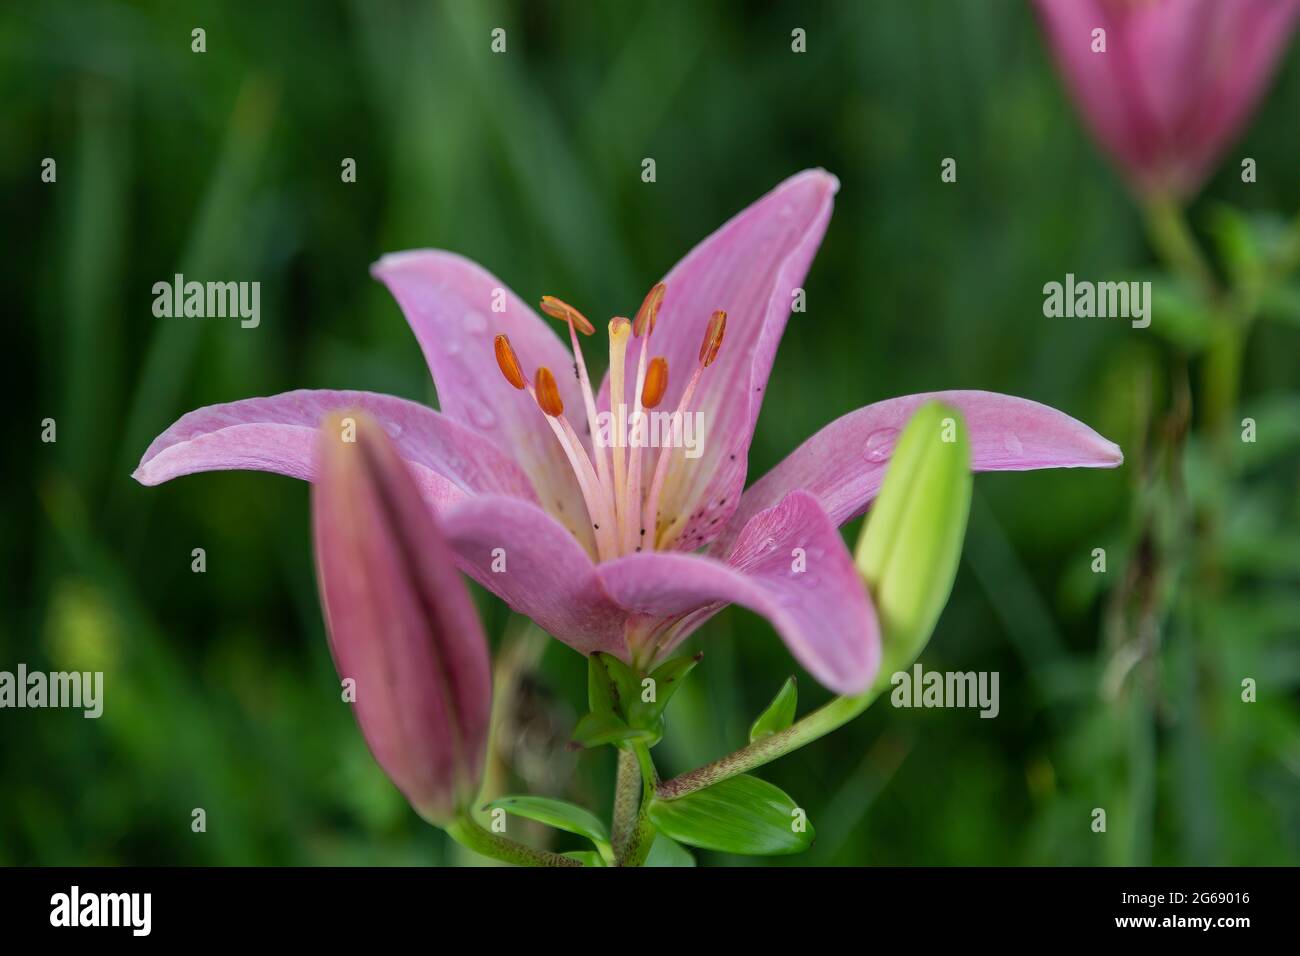 a close up of a pink lily newly opened in the garden Stock Photo